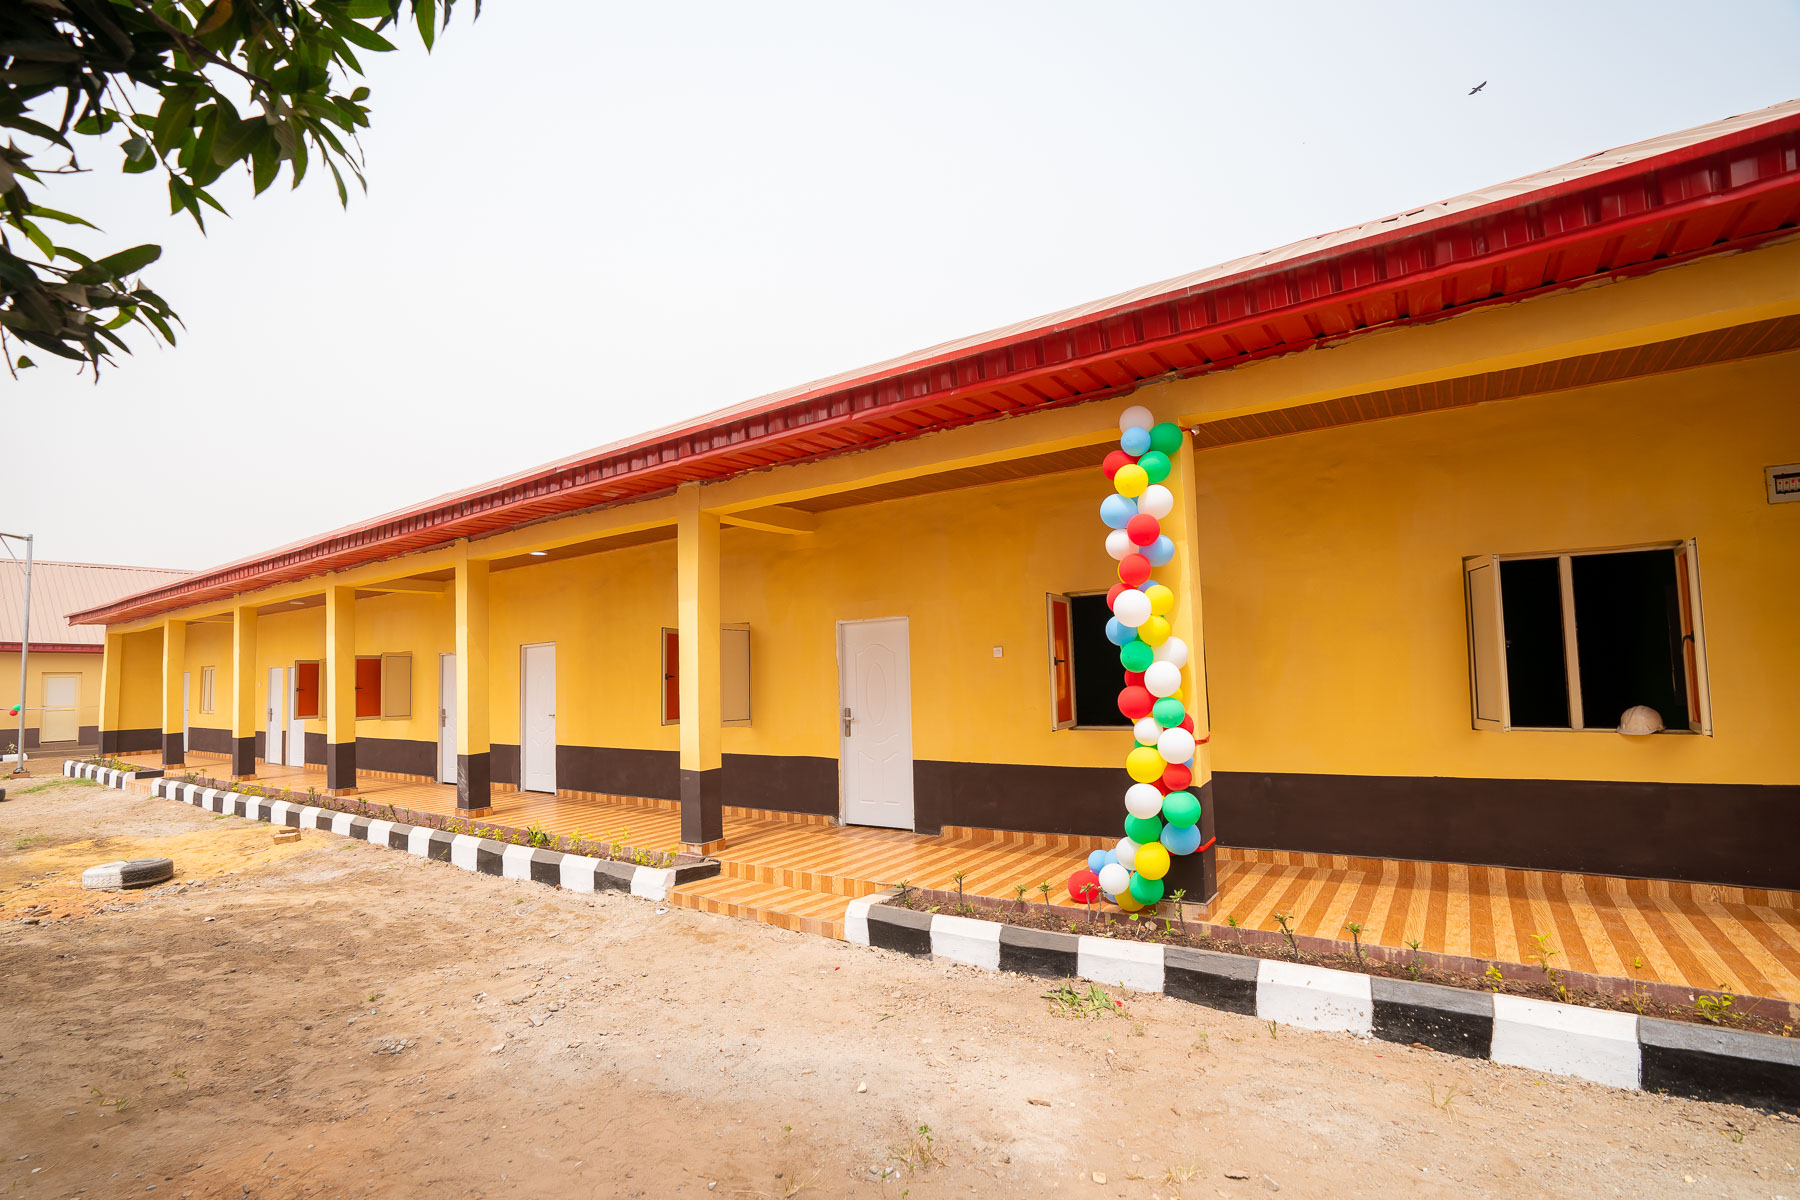 L-R: The newly commissioned three blocks of classrooms by Governor Babajide Sanwo-Olu at Gbagada Girls Junior Secondary School, Bariga, on Friday, February 13, 2020.